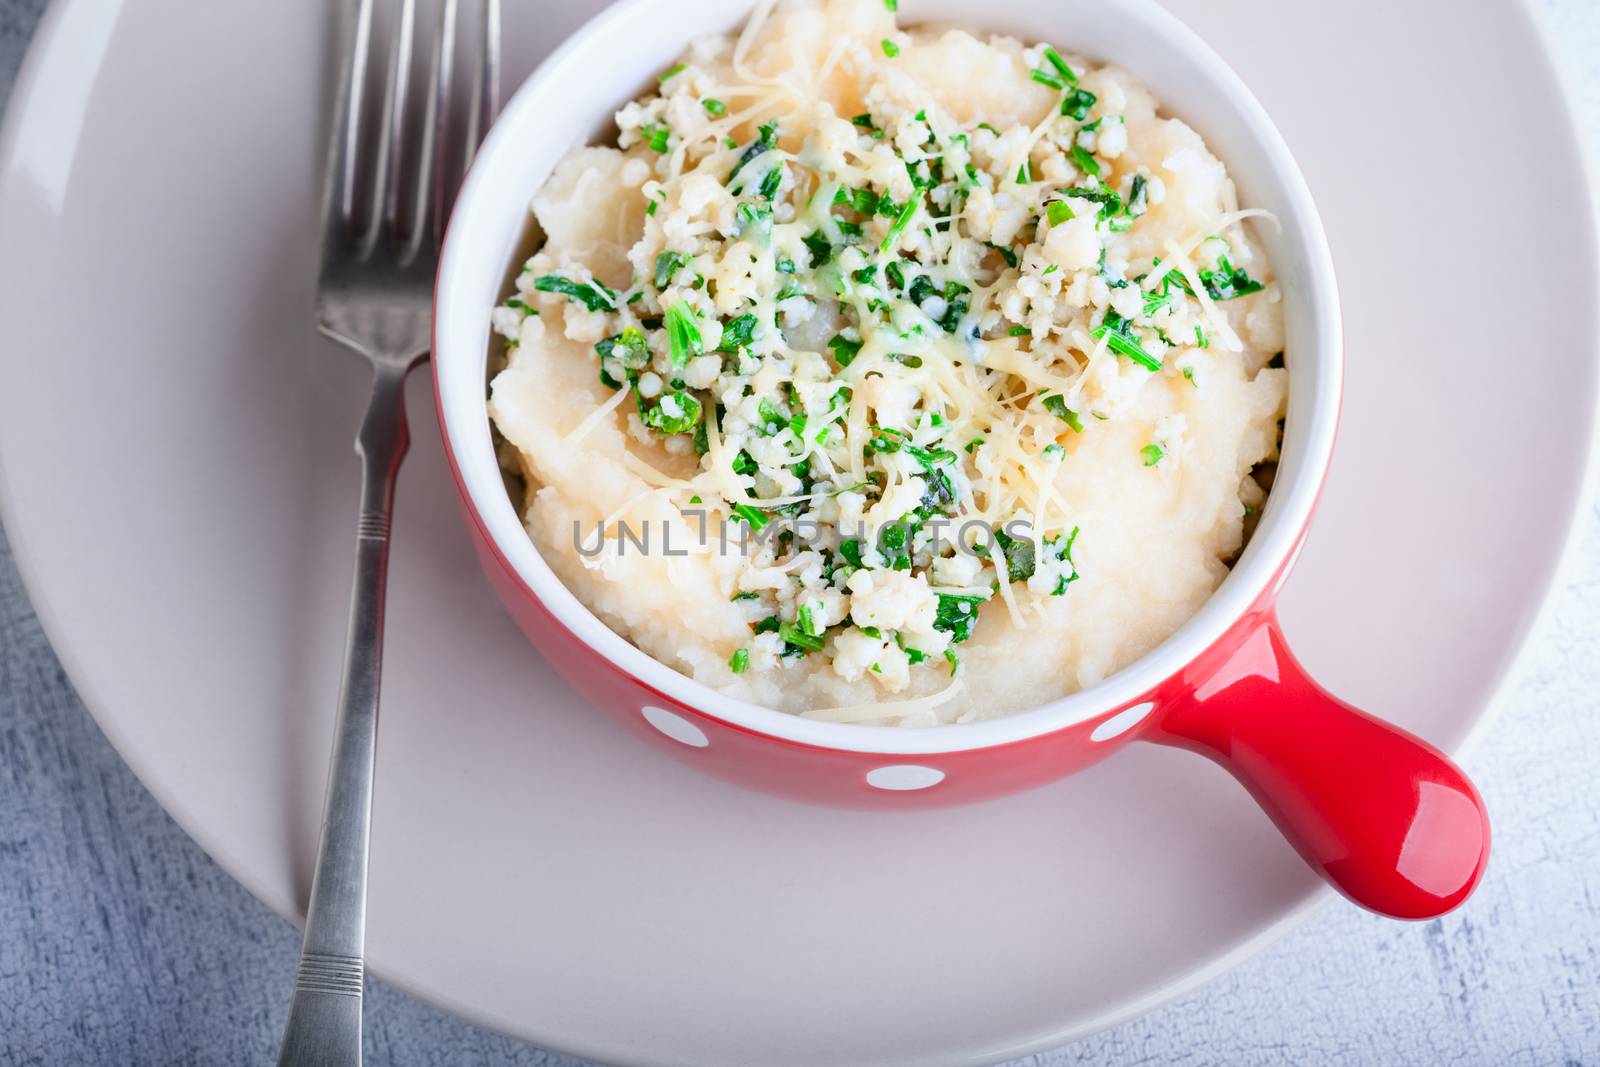 Fish pie with celery root by supercat67